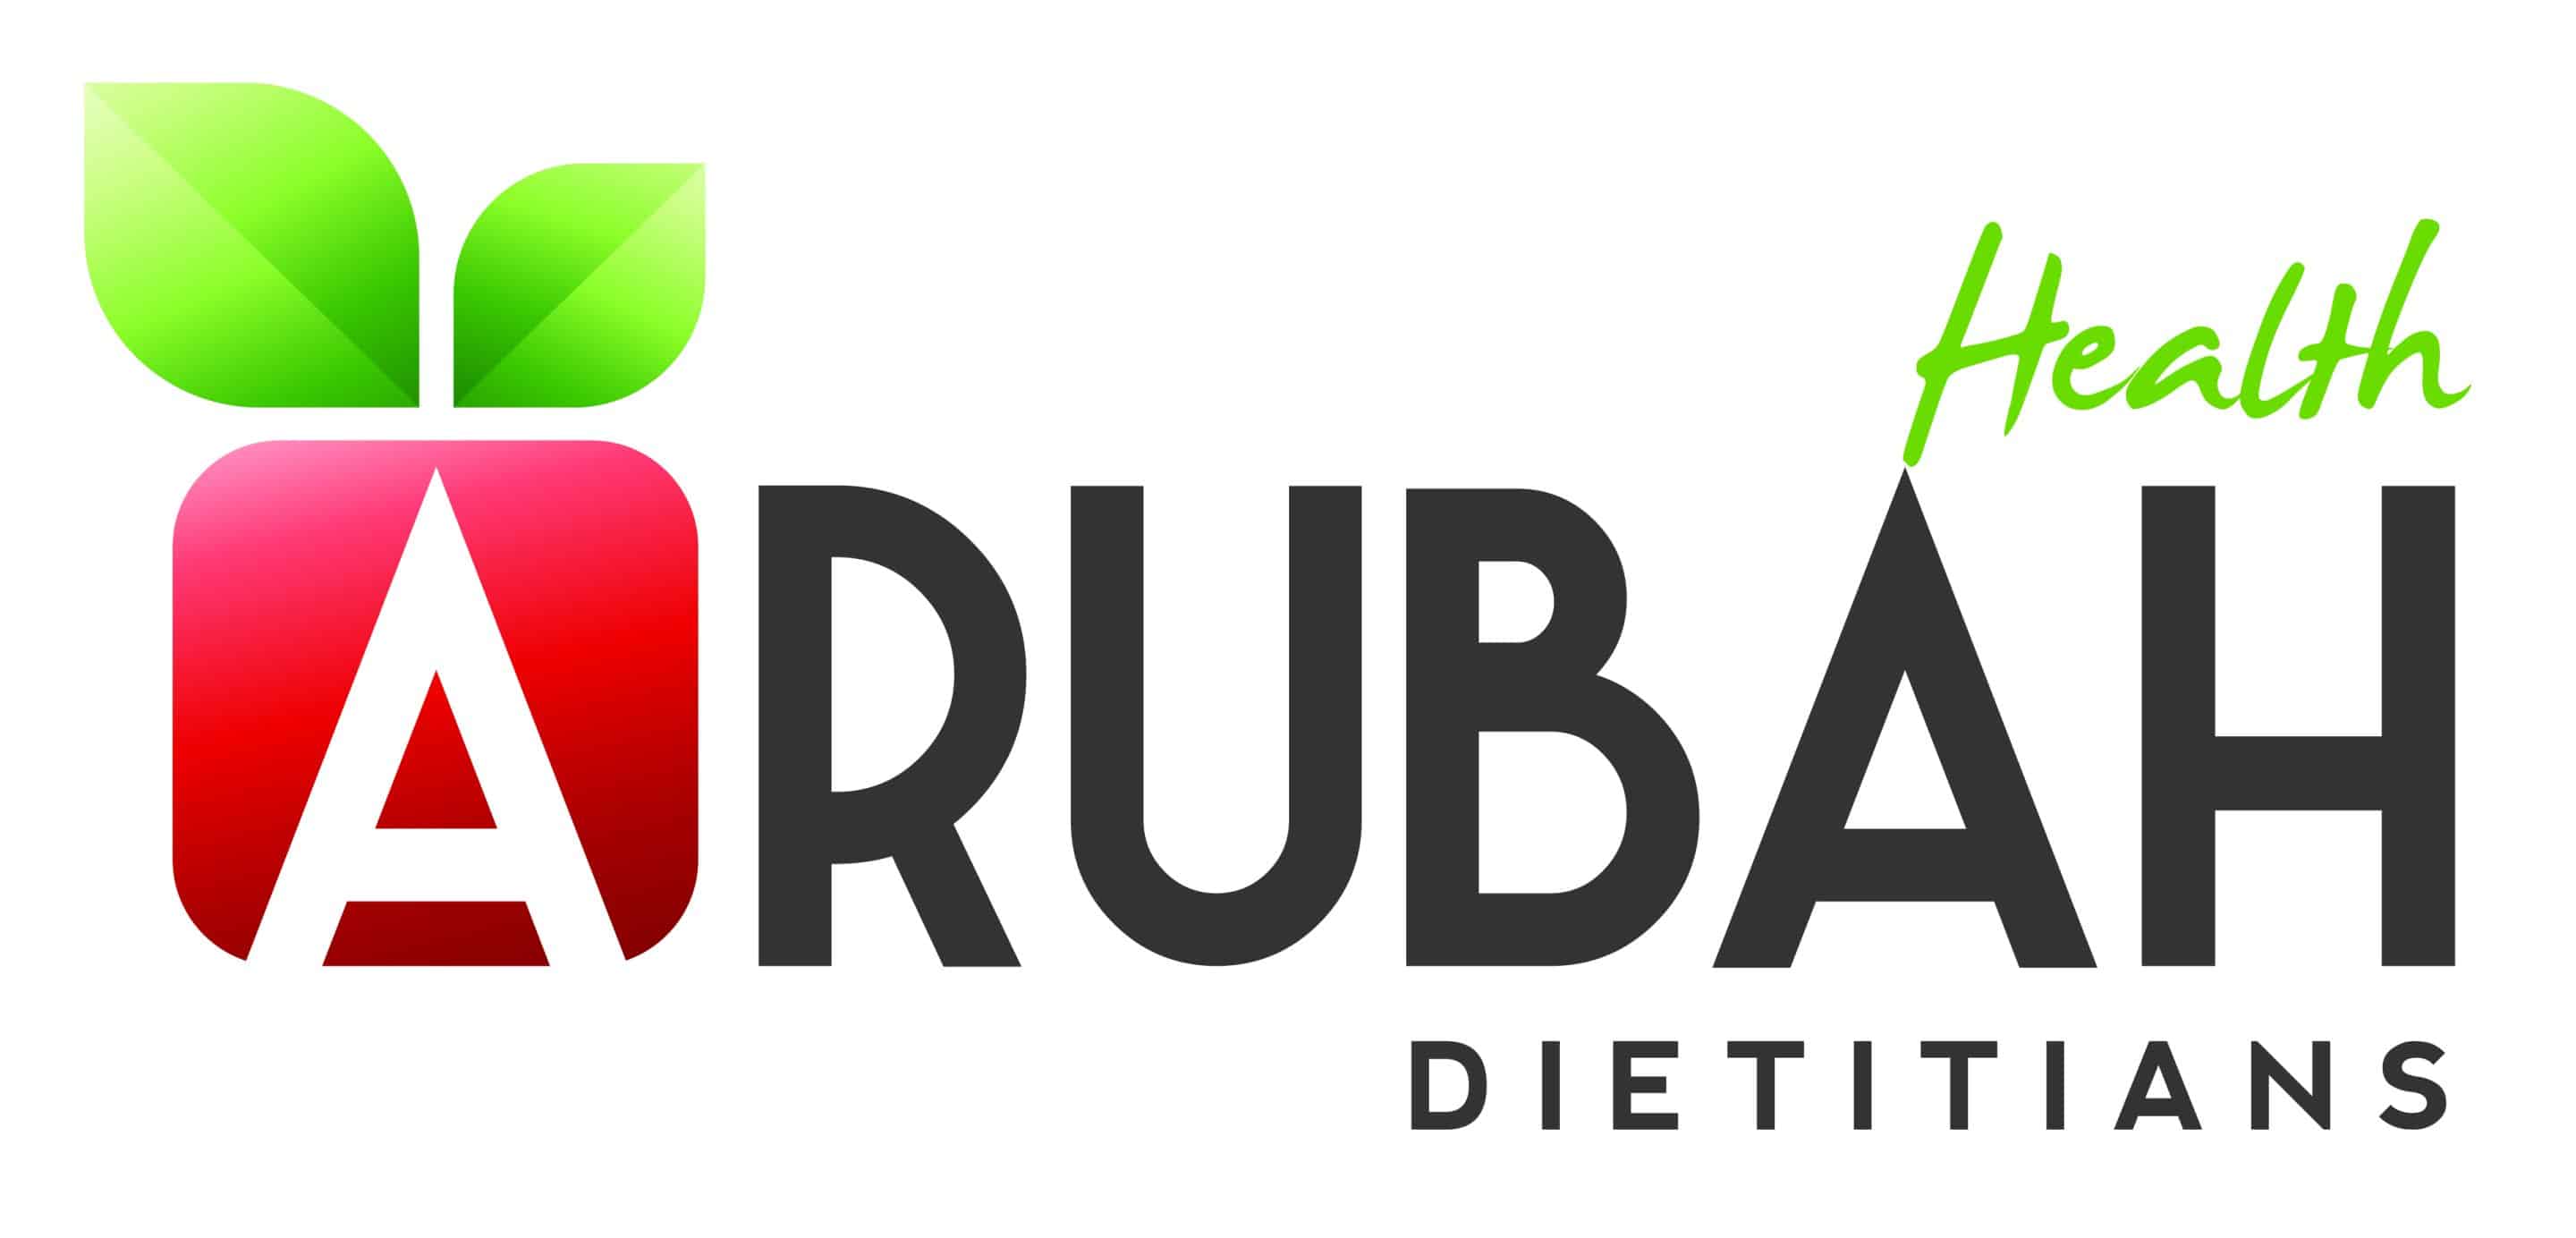 Arubah Health LOGO featuring a picture of an apple